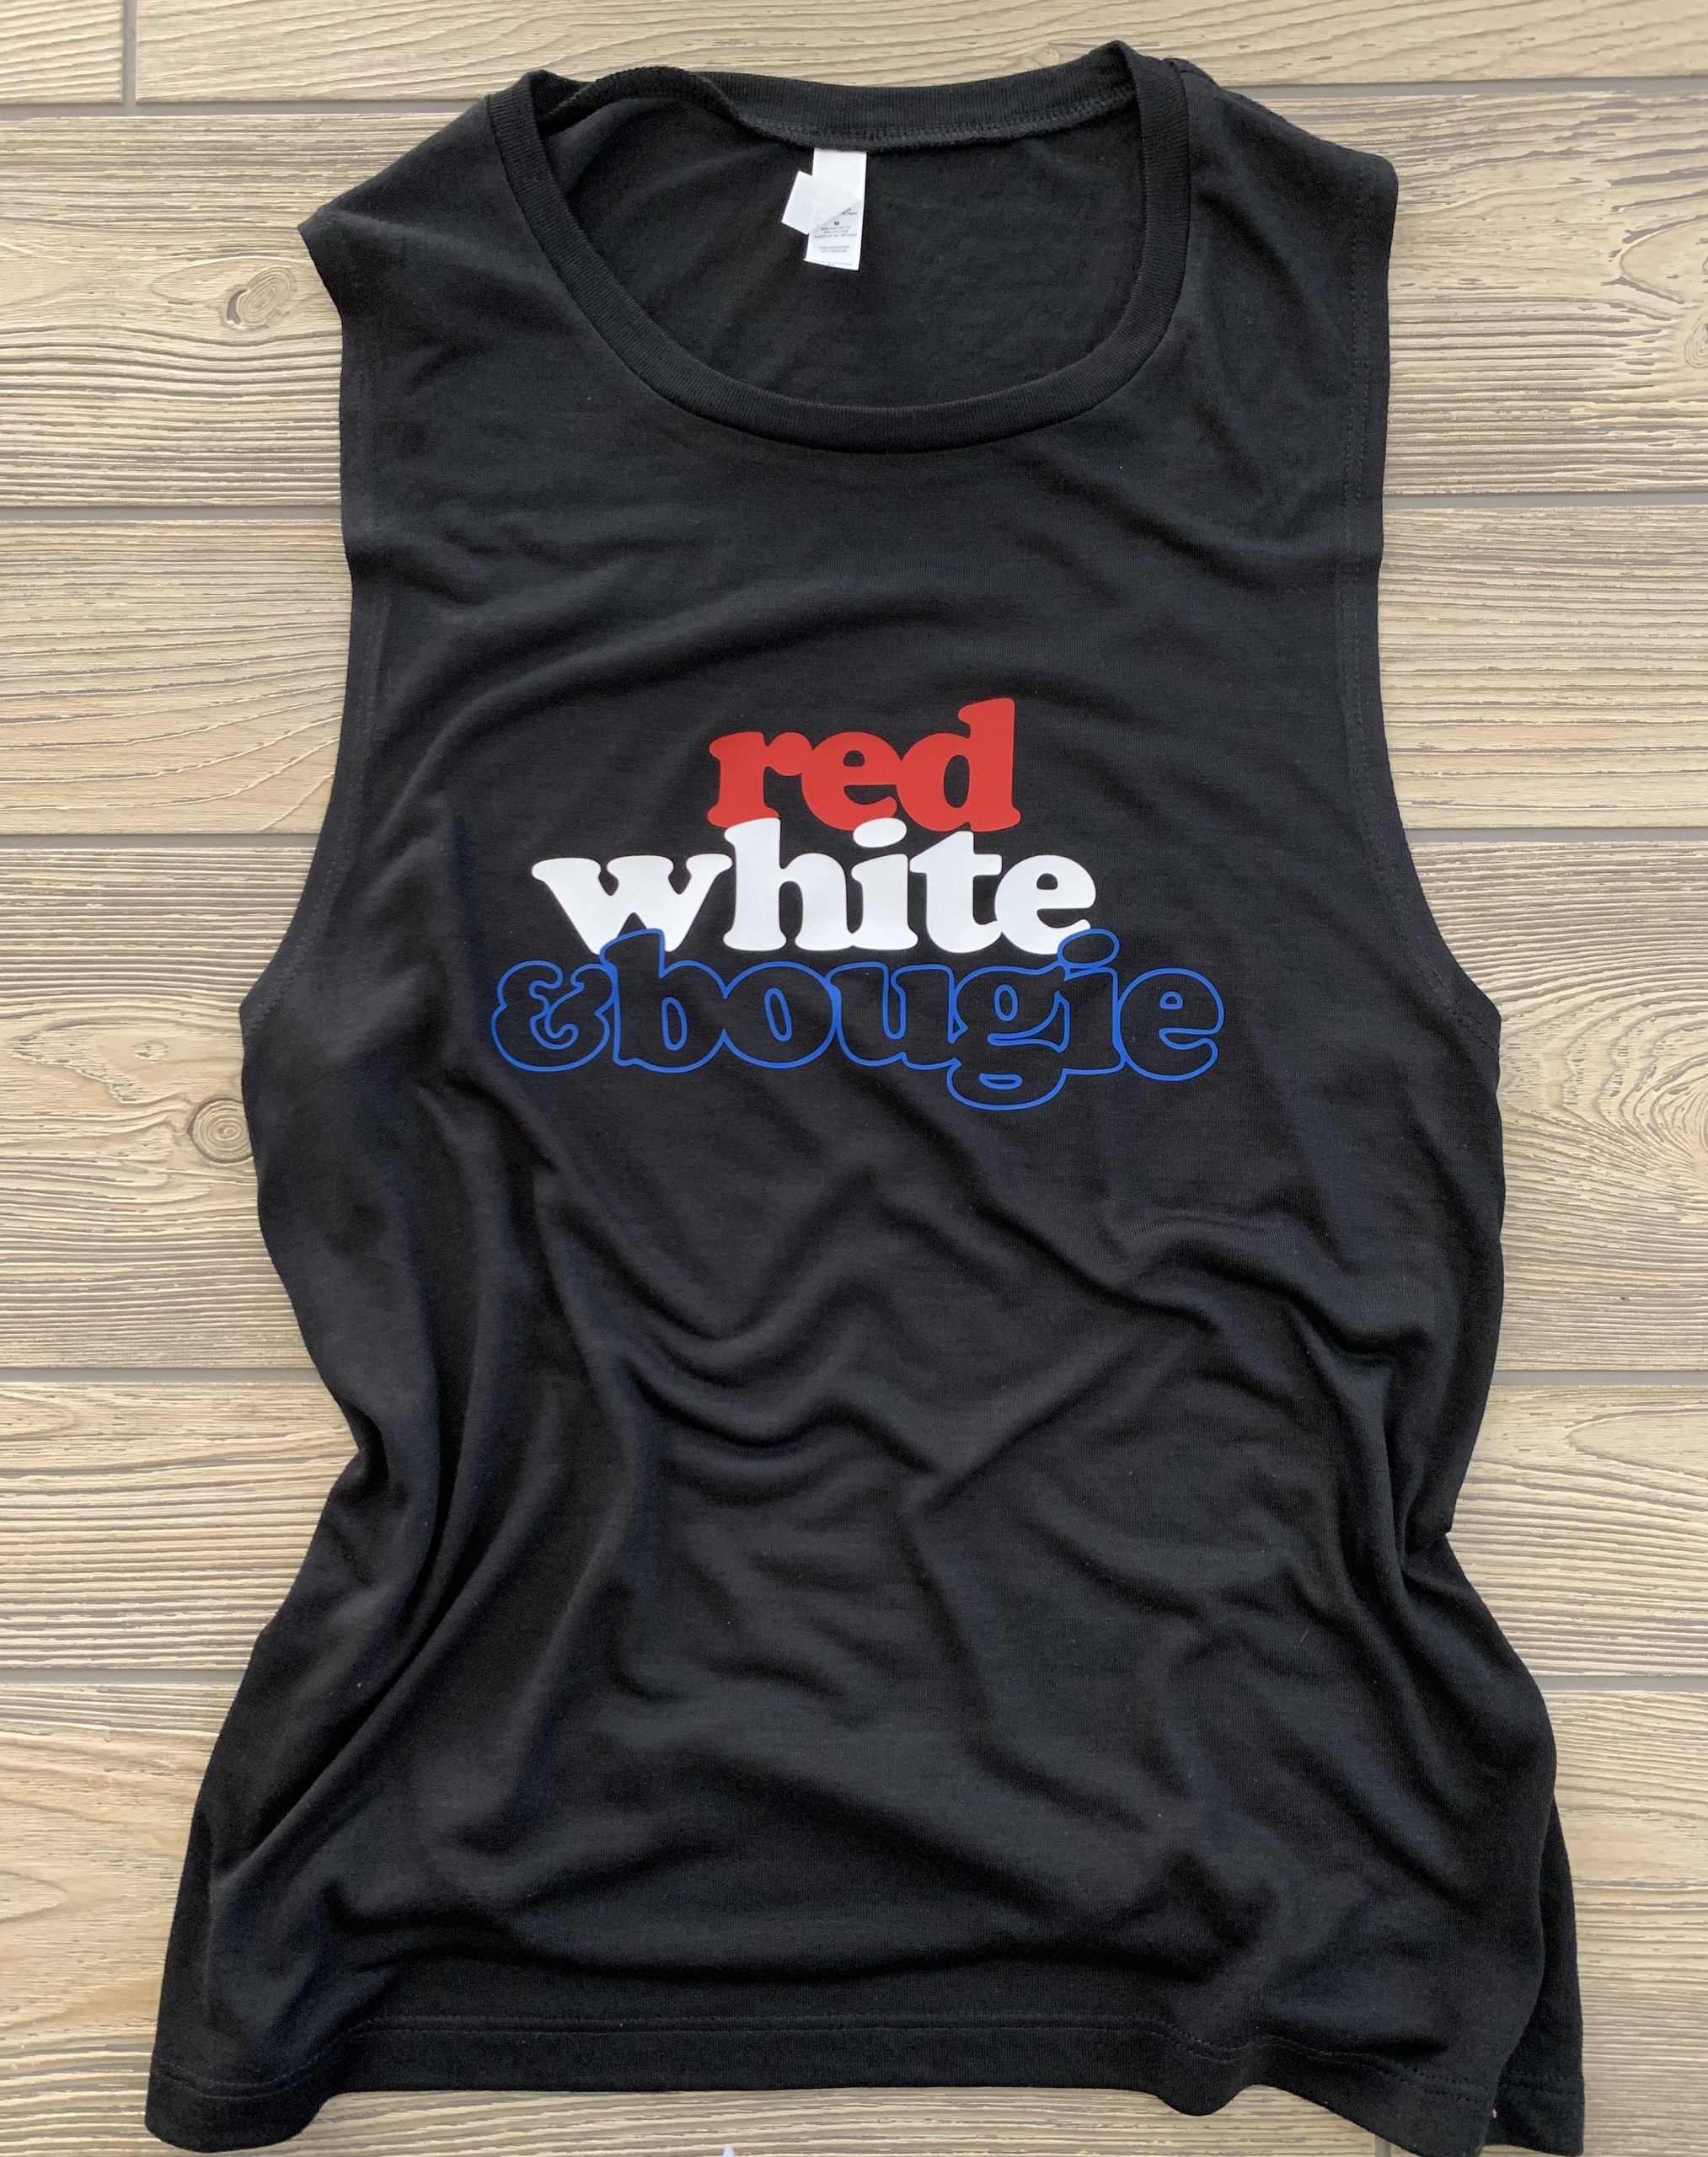 Red white and bougie tank